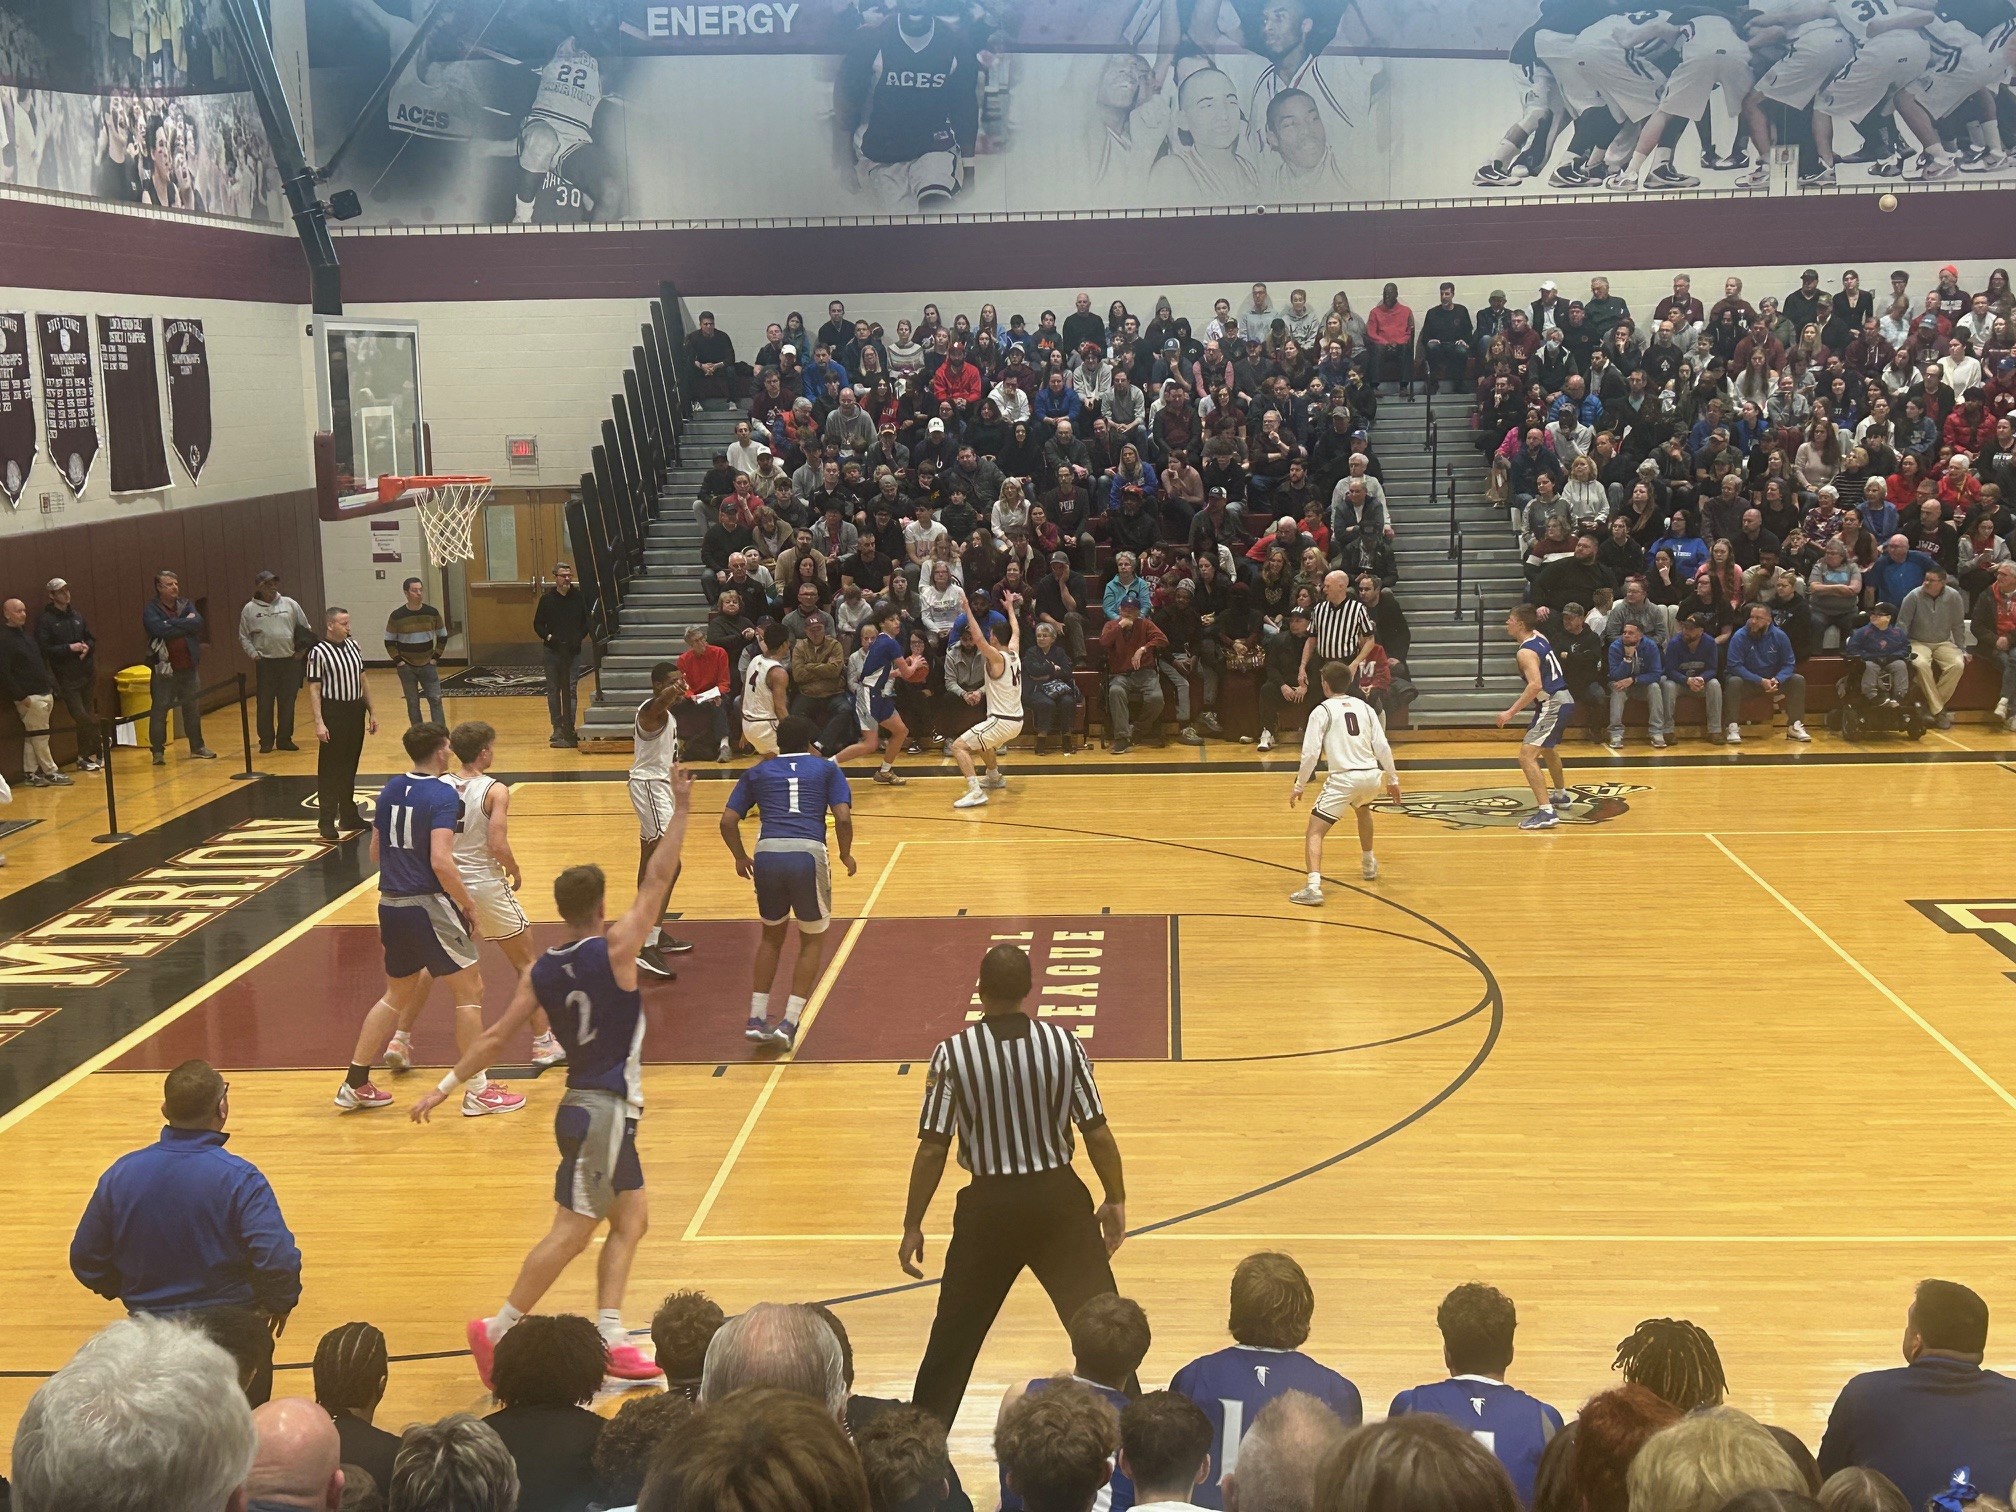 Despite Early Test, Lower Merion Is Able To Shoot Past Cedar Crest As Aces Roll Into Second Round Of PIAA-6A State Playoffs Behind 30-Point Triumph While Falcons Say Goodbye To Senior Class That ‘Raised The Bar’